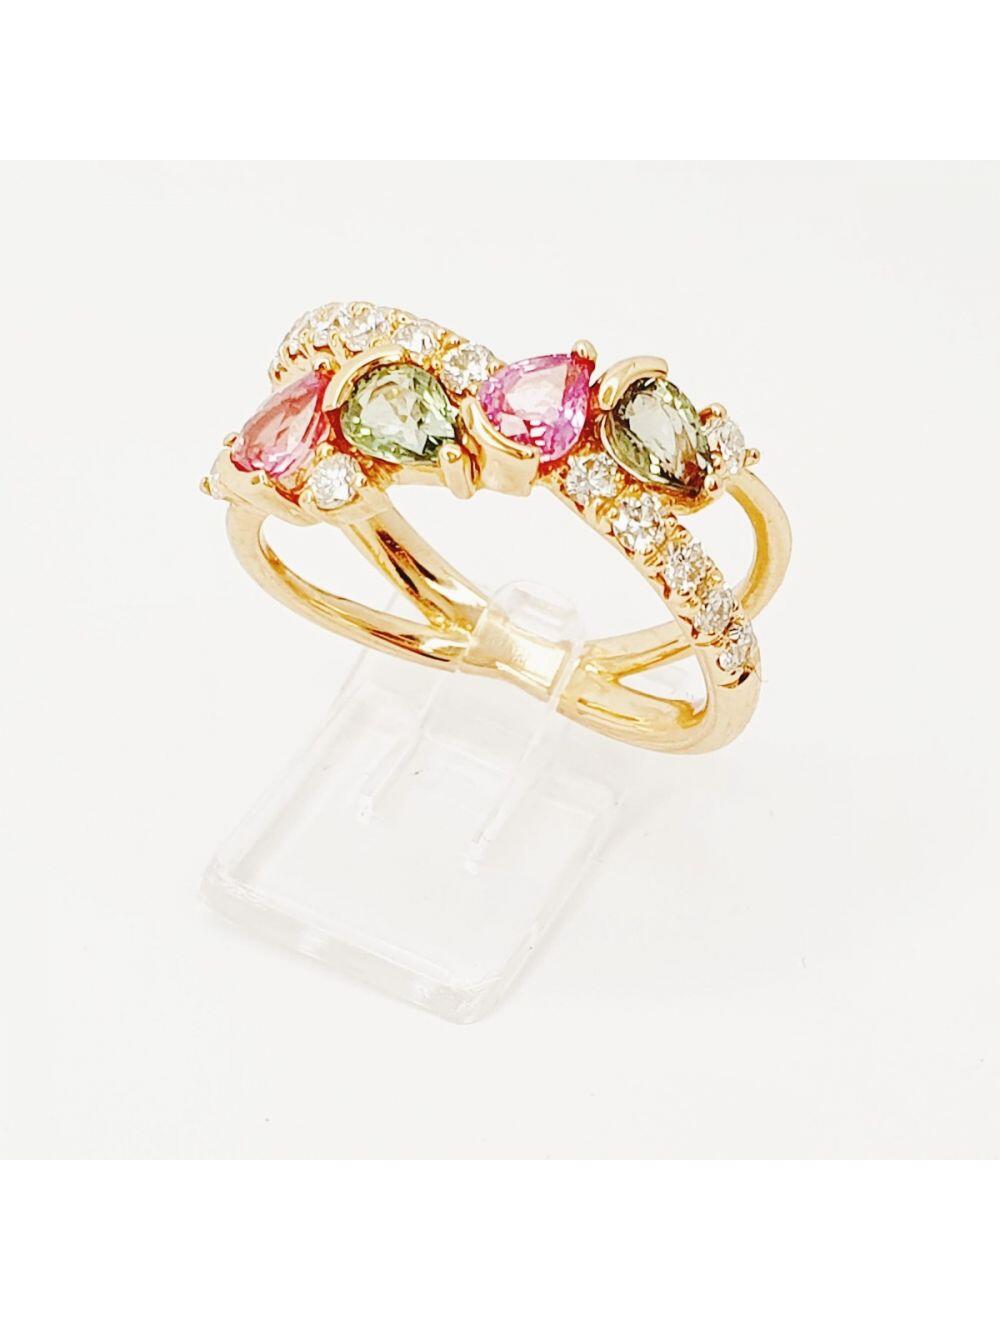 # Rose gold ring with 0.54ct pink sapphire and 0.56ct green sapphire and 0.495ct natural diamonds